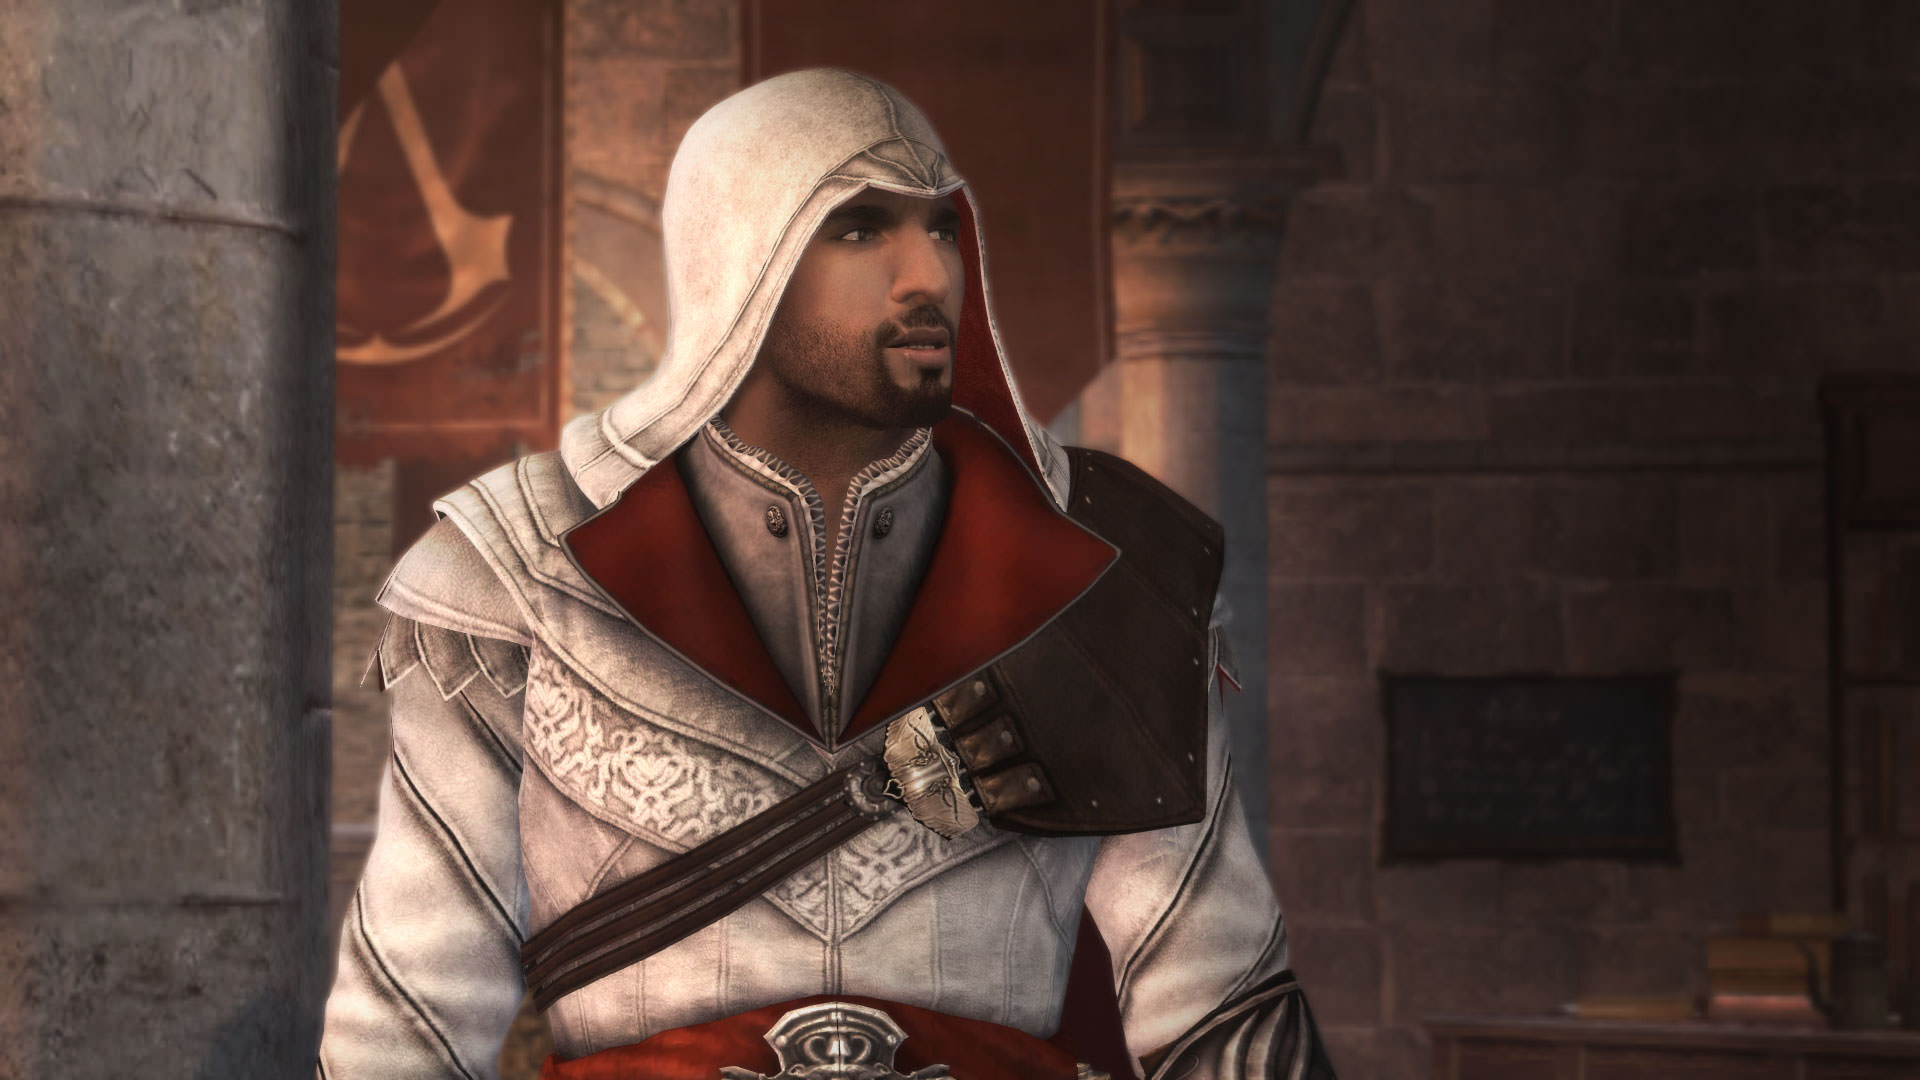 Assassin's Creed: The Ezio Collection coming to Switch on February